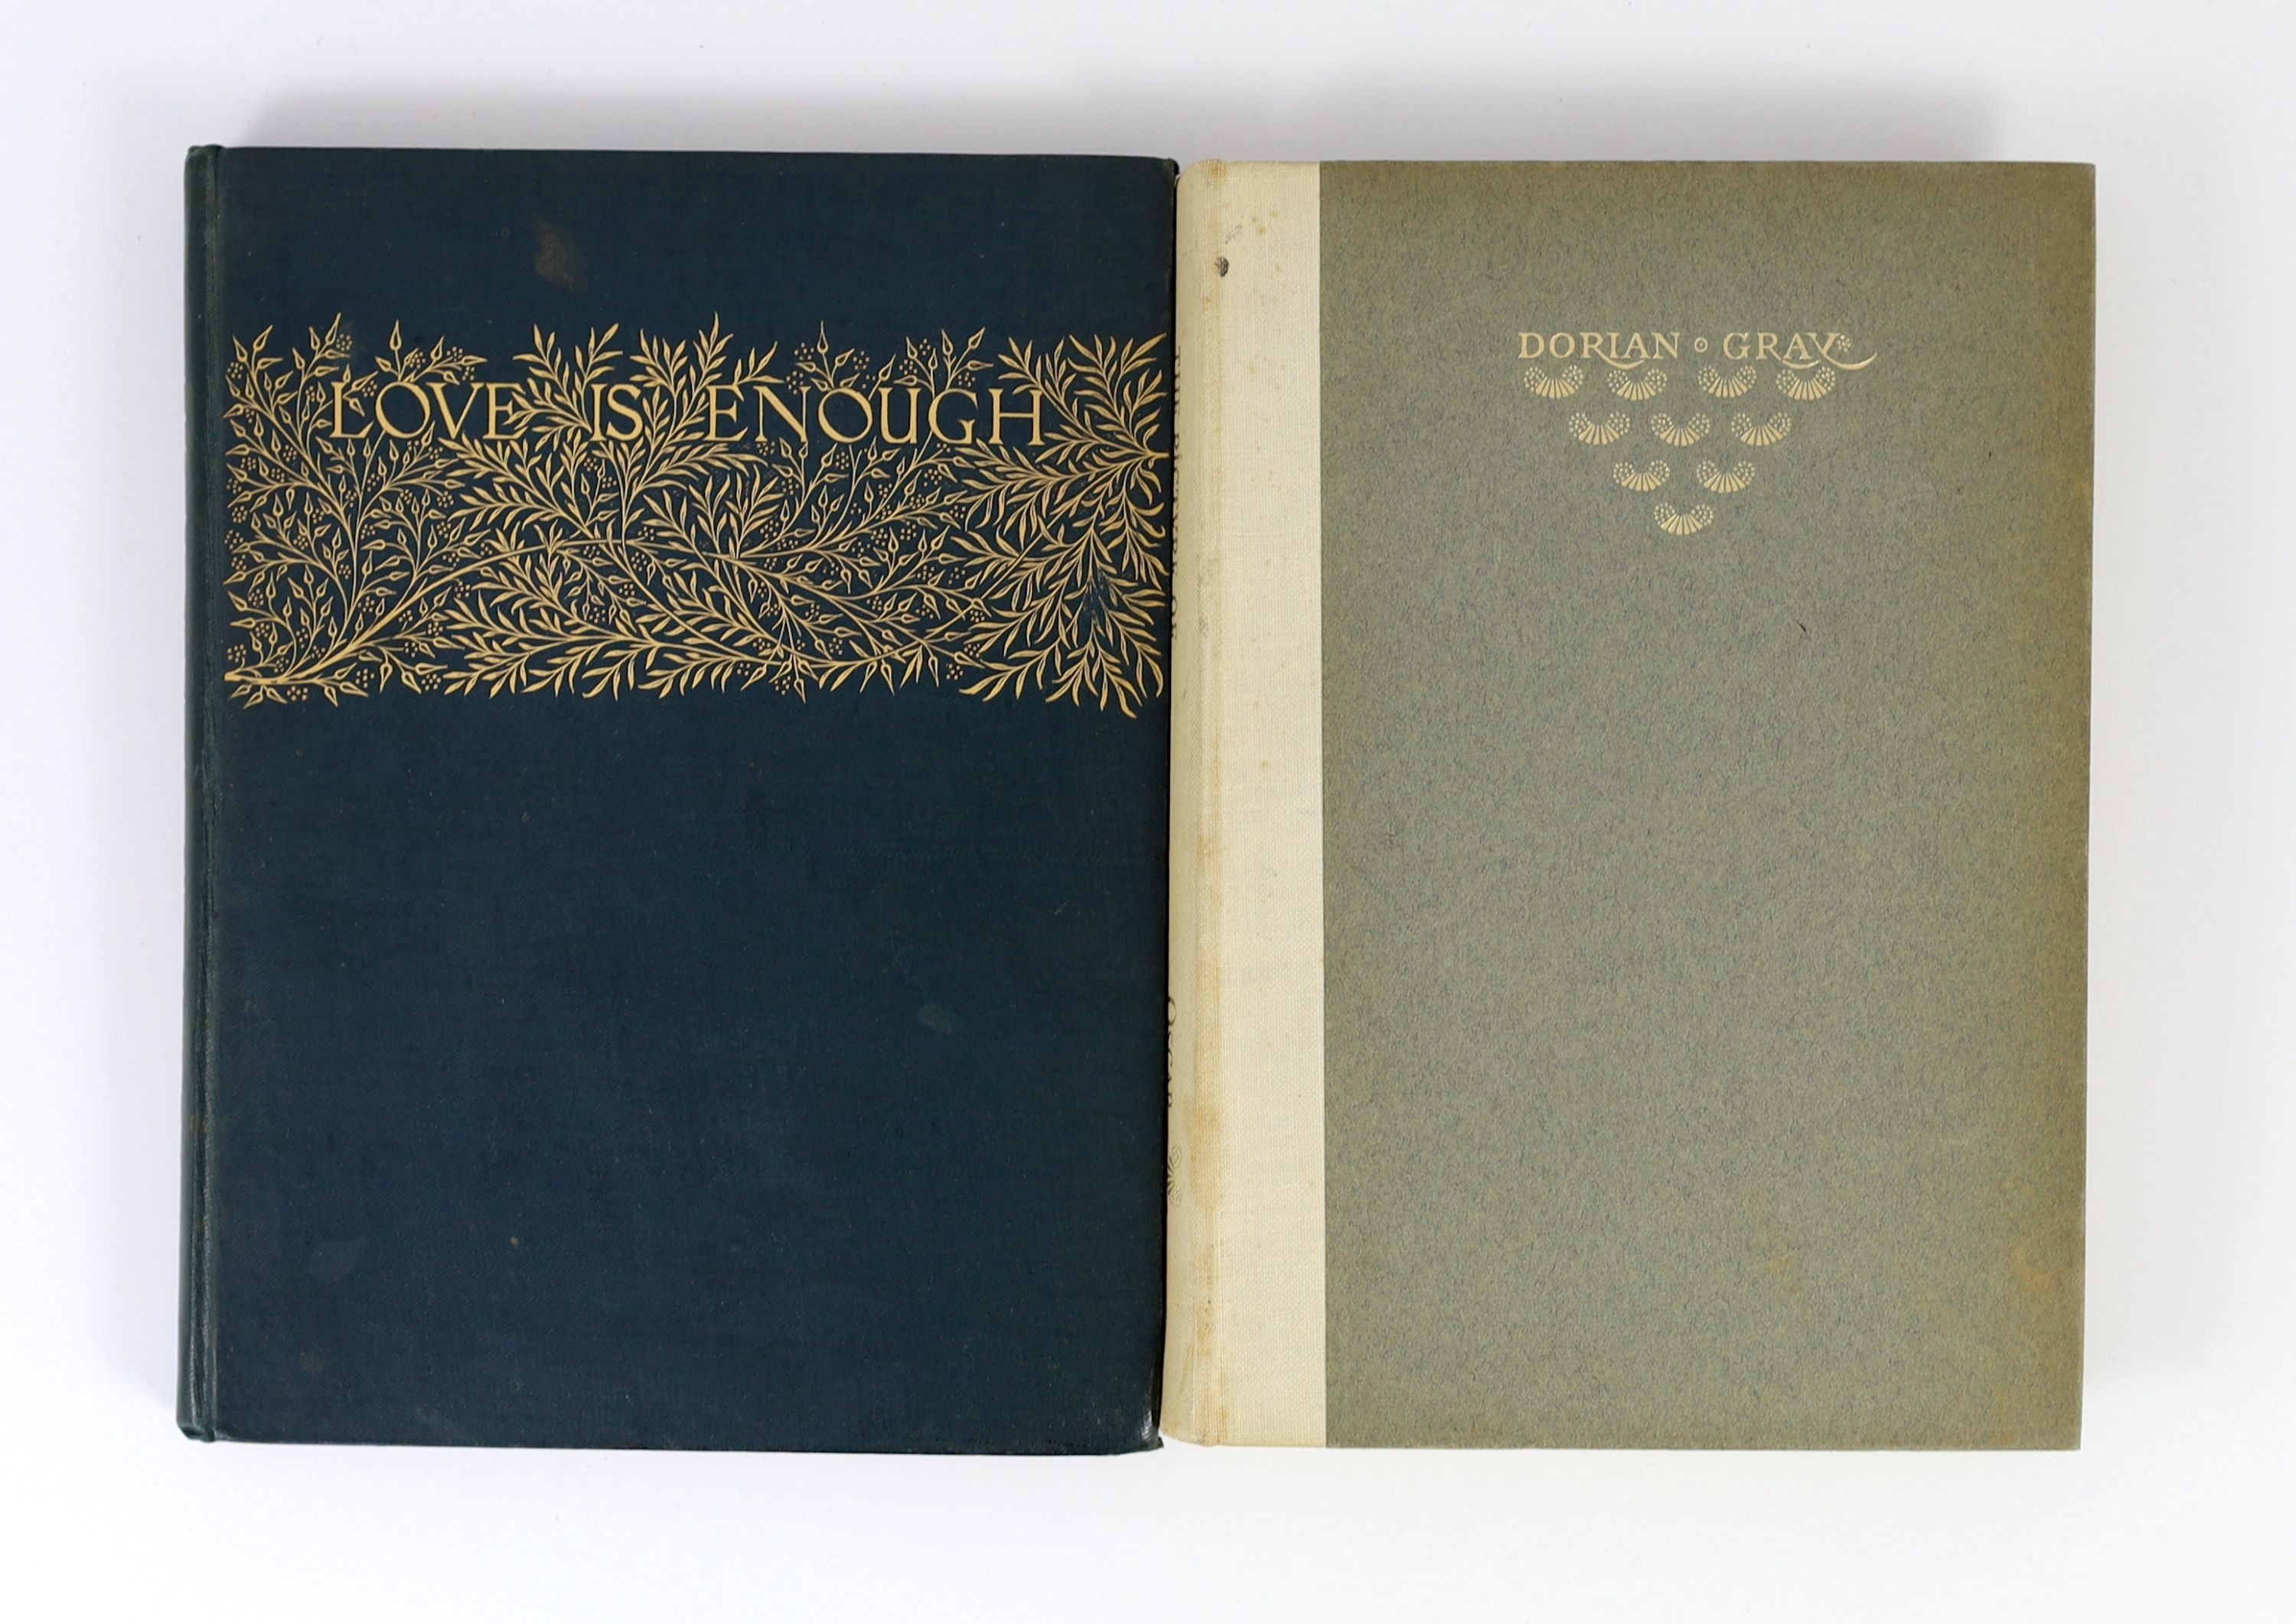 Morris, William - Love is Enough or The Feeing of Pharamond, 8vo, cloth gilt cover design by William Morris, Ellis and White, London, 1873 and Wilde, Oscar - The Picture of Dorian Gray, 8vo, half cloth, Unicorn Press, Lo